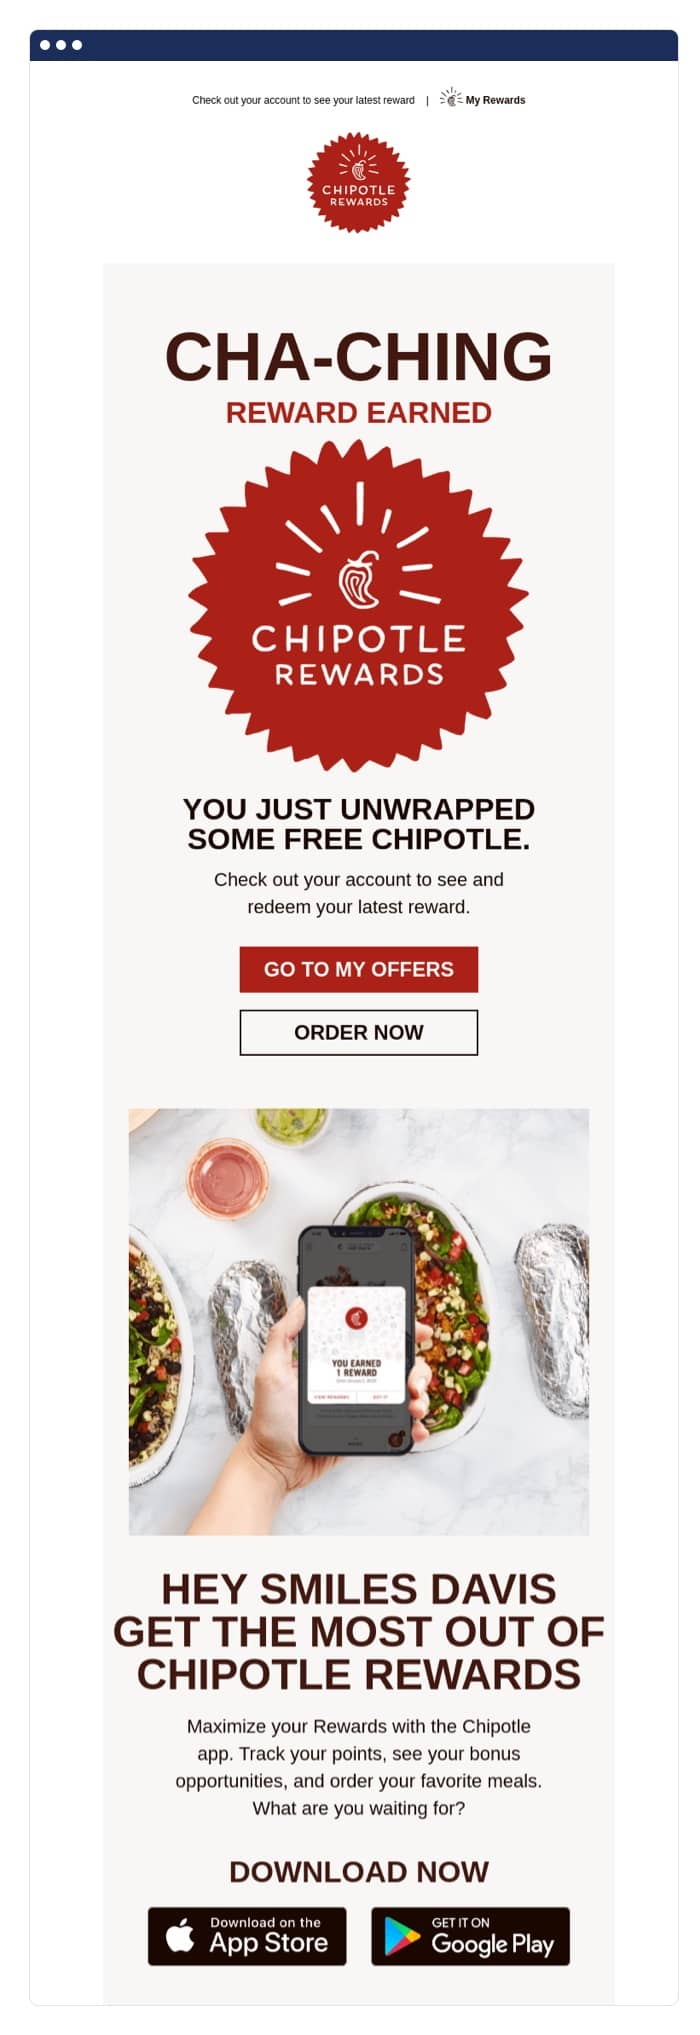 Chipotle reward email example